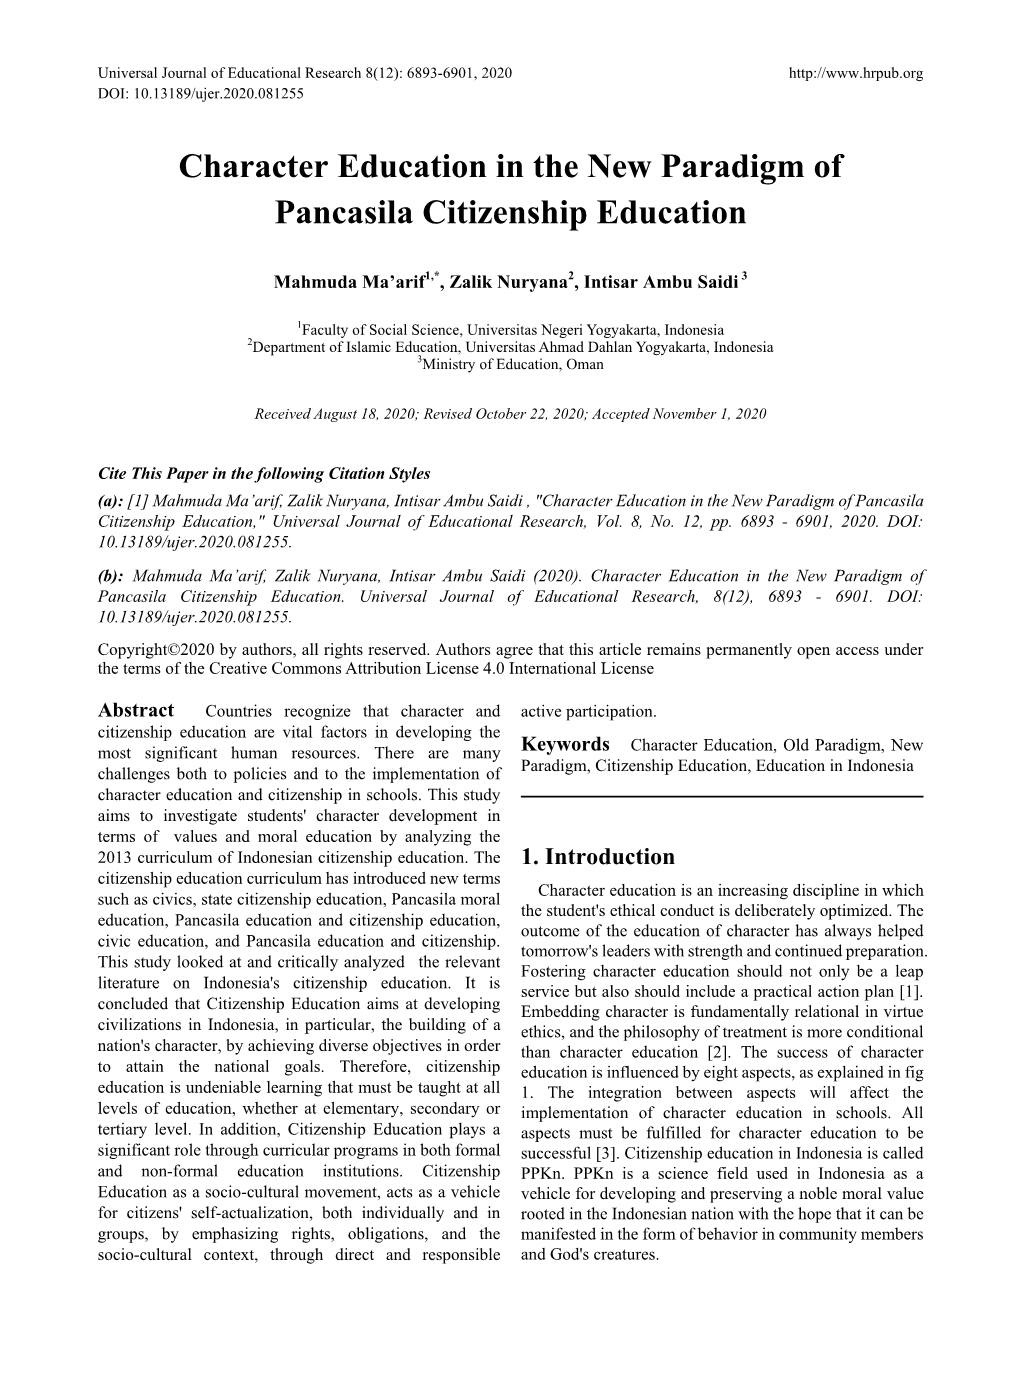 Character Education in the New Paradigm of Pancasila Citizenship Education